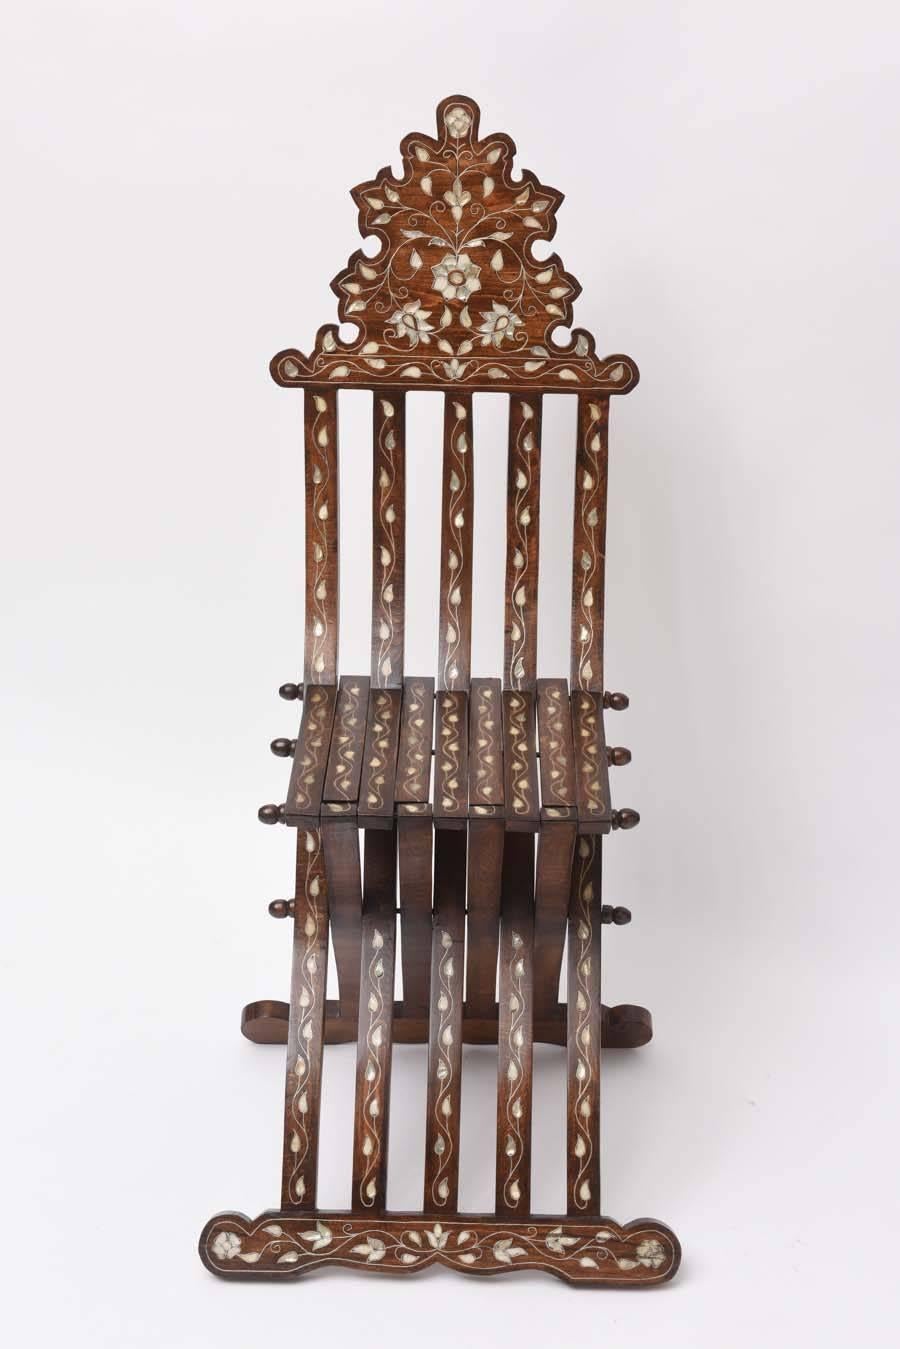 Syrian wood folding chair with intricate foliate inlays in silvered metal and mother-of-pearl. Excellent condition.